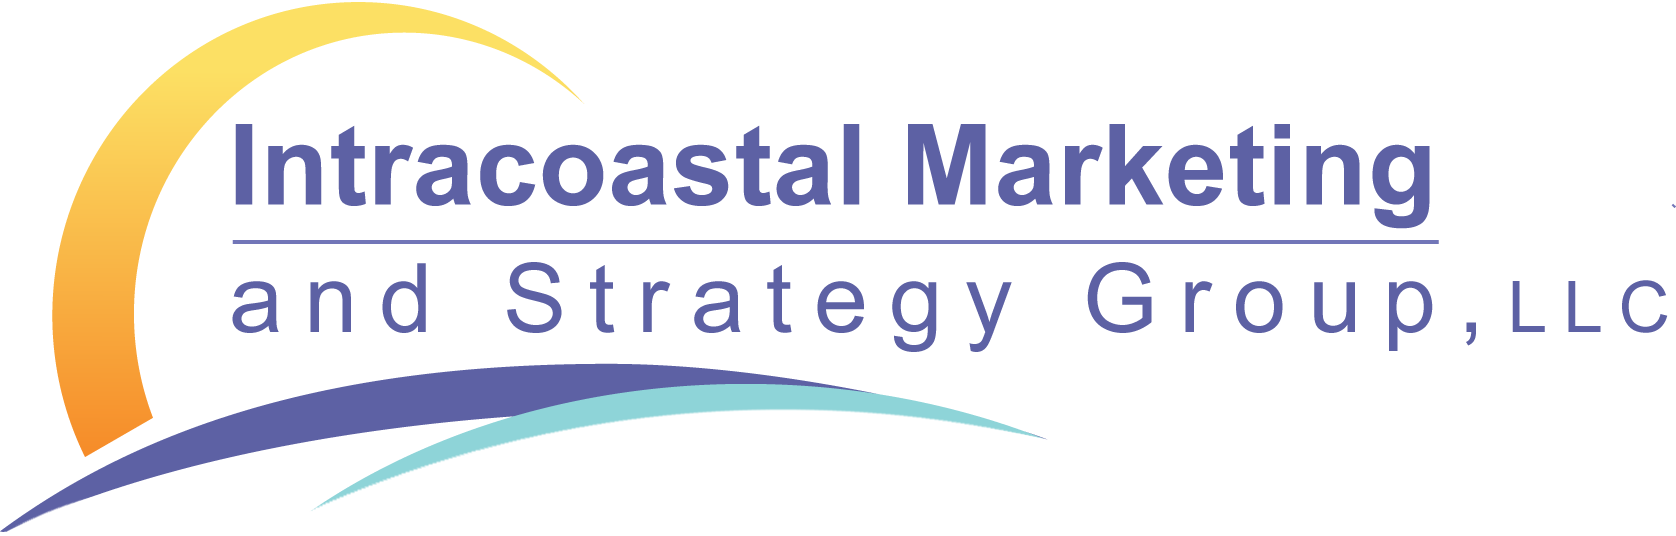 INTRACOASTAL MARKETING AND STRATEGY GROUP